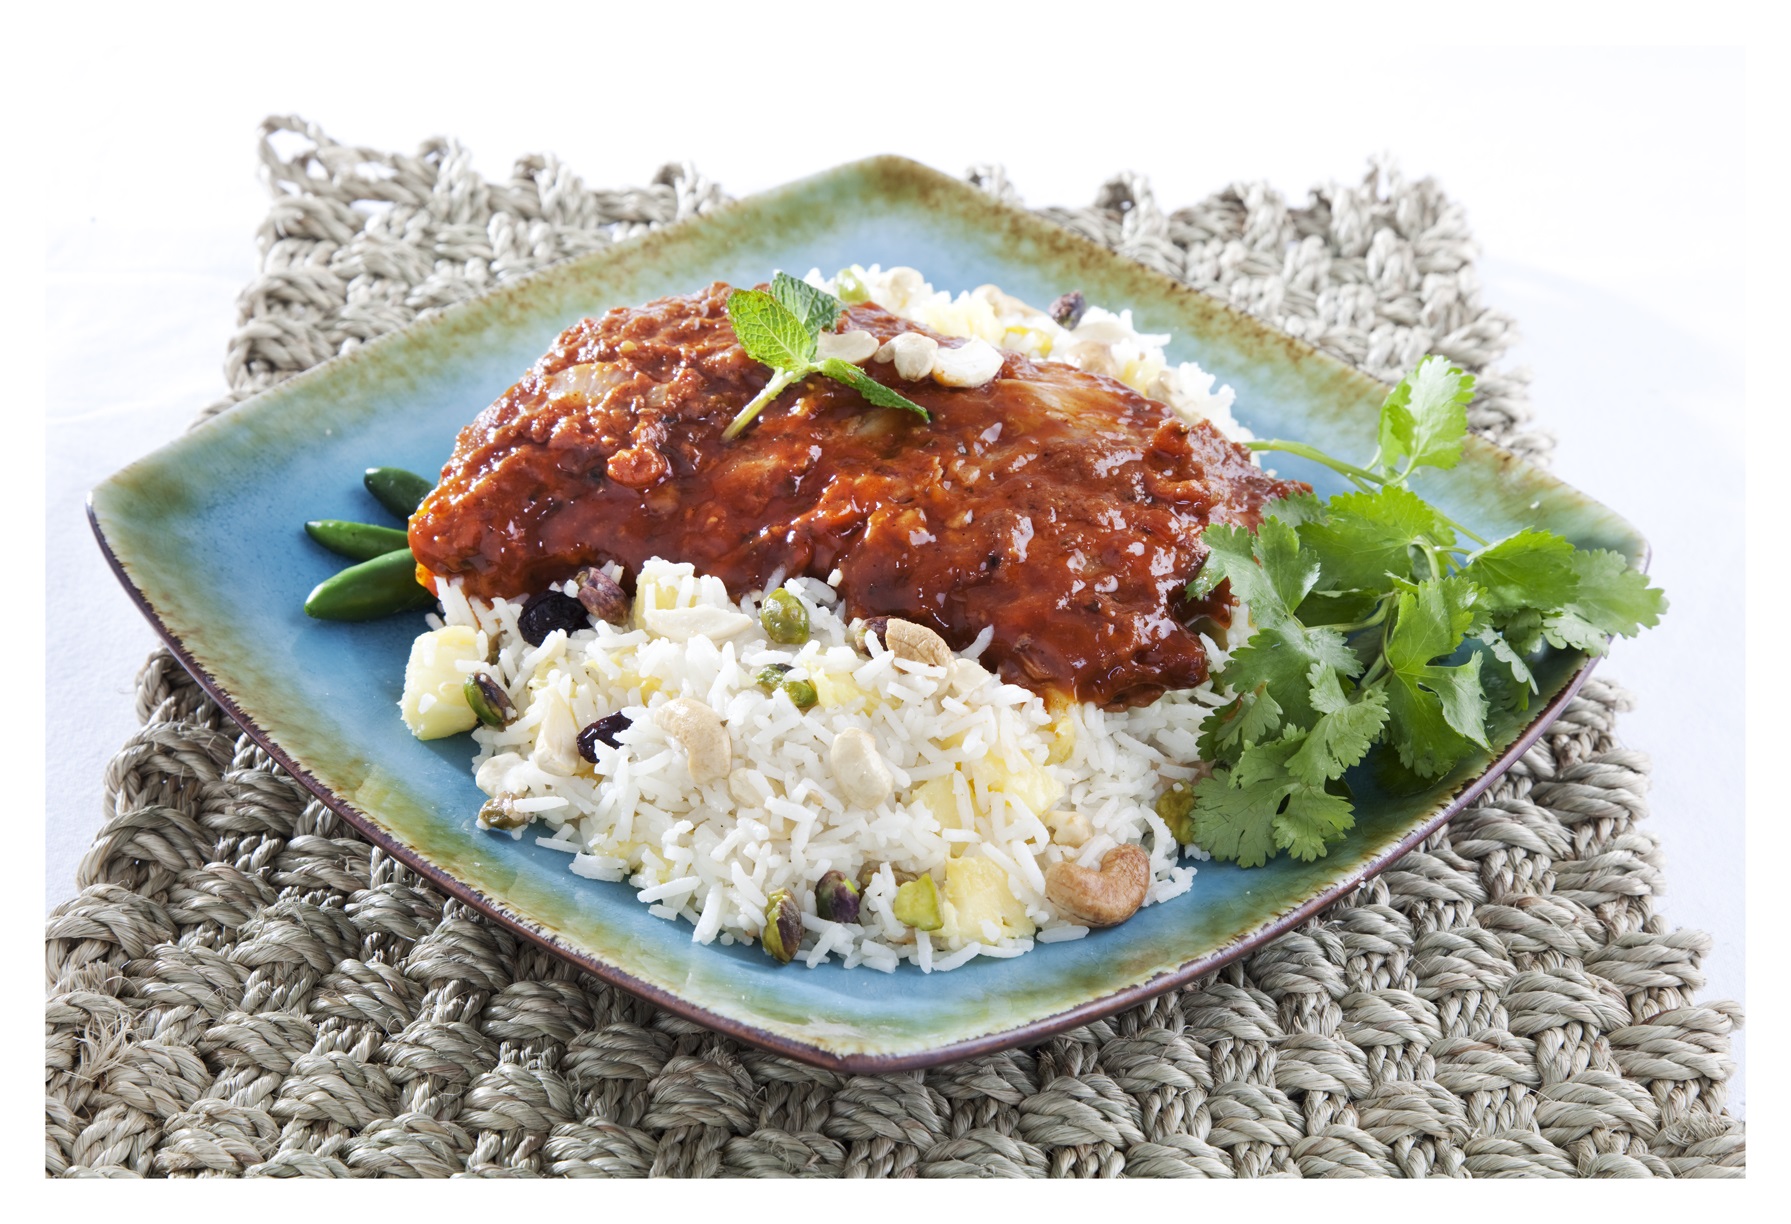 Bombay Barbeque Beef Ribs with Kashmiri Rice